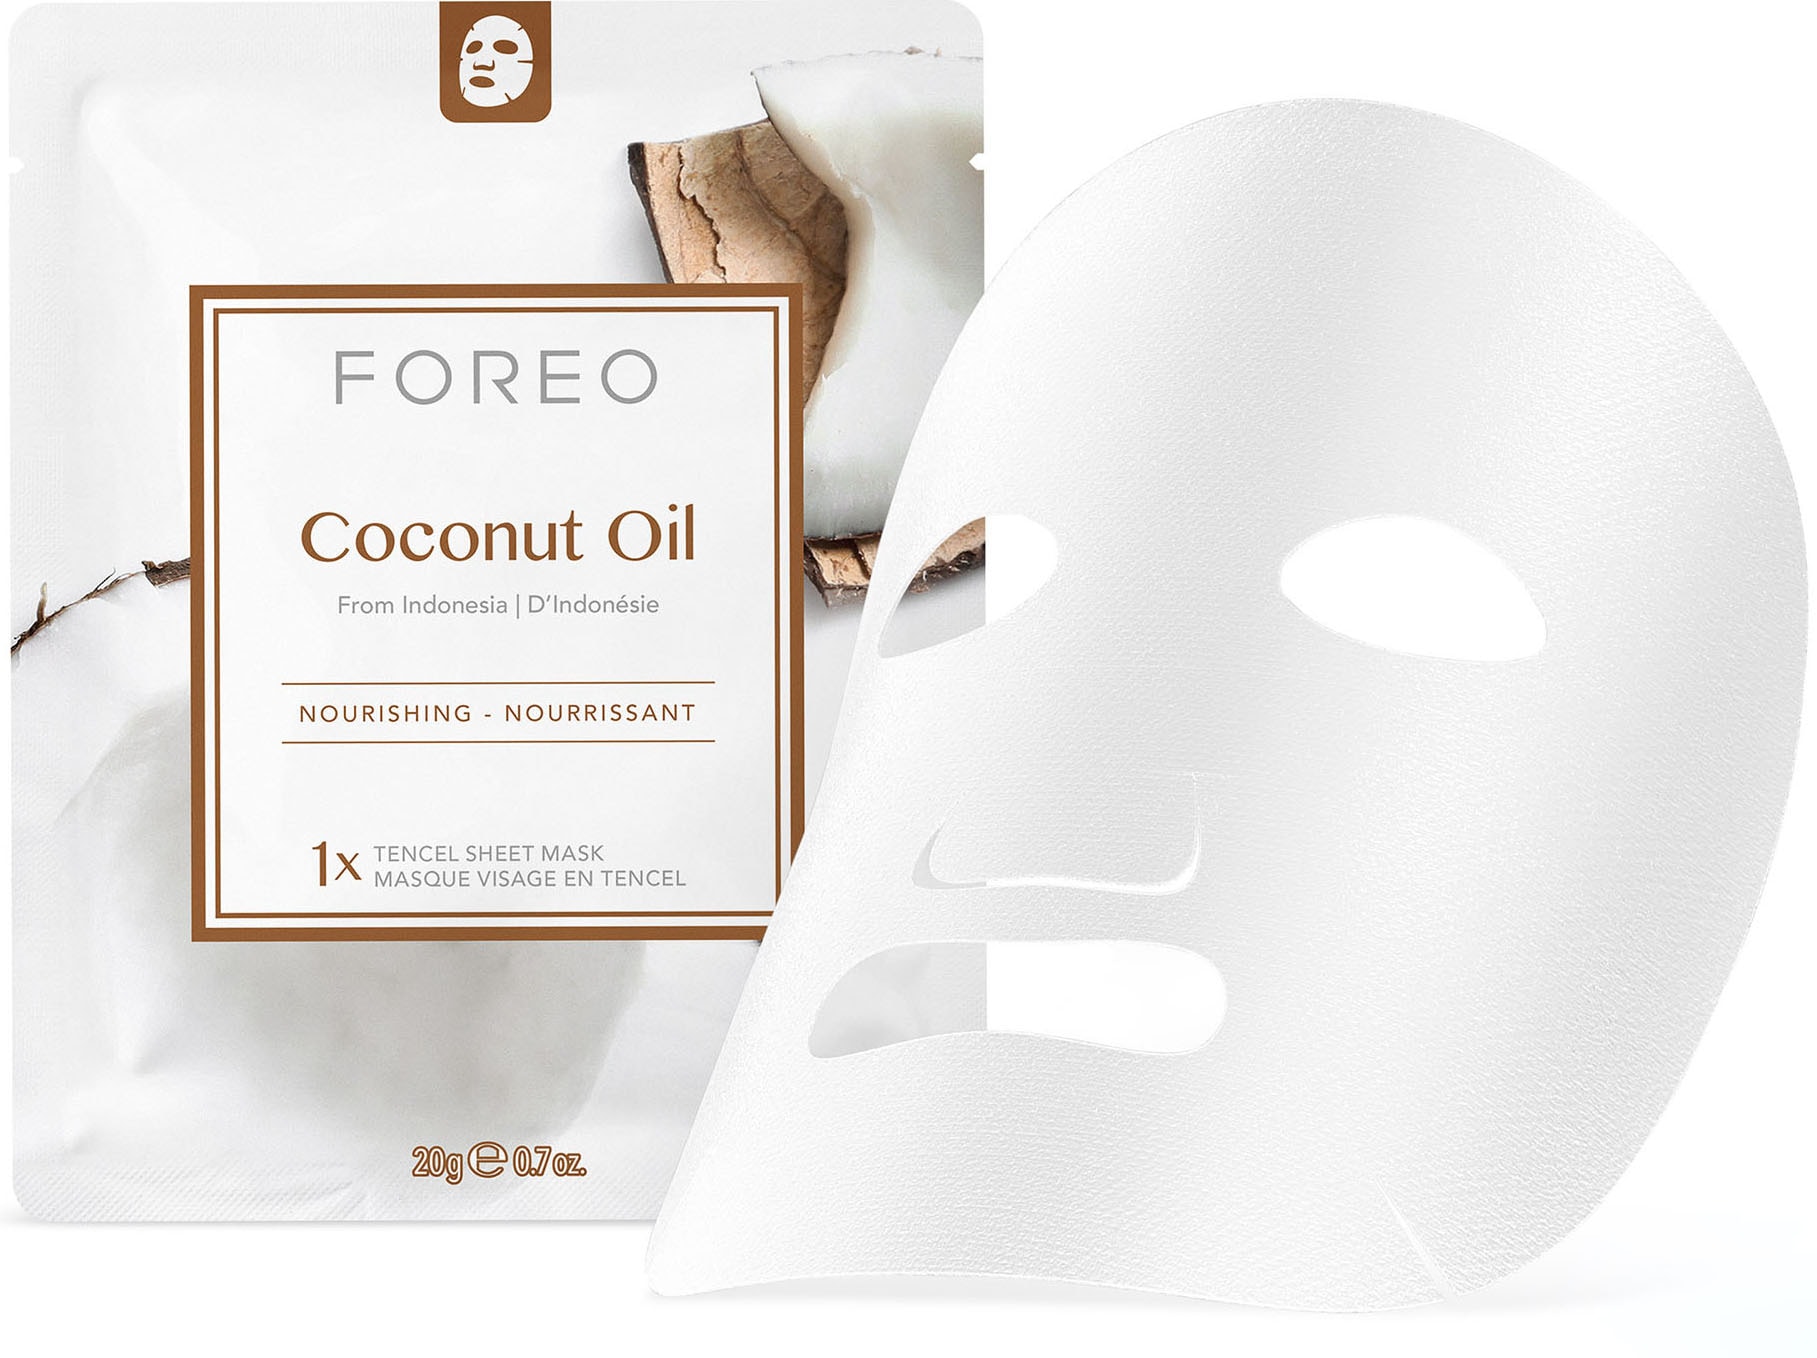 »Farm online FOREO Masks Face bei Gesichtsmaske Sheet Coconut To UNIVERSAL Oil« Collection